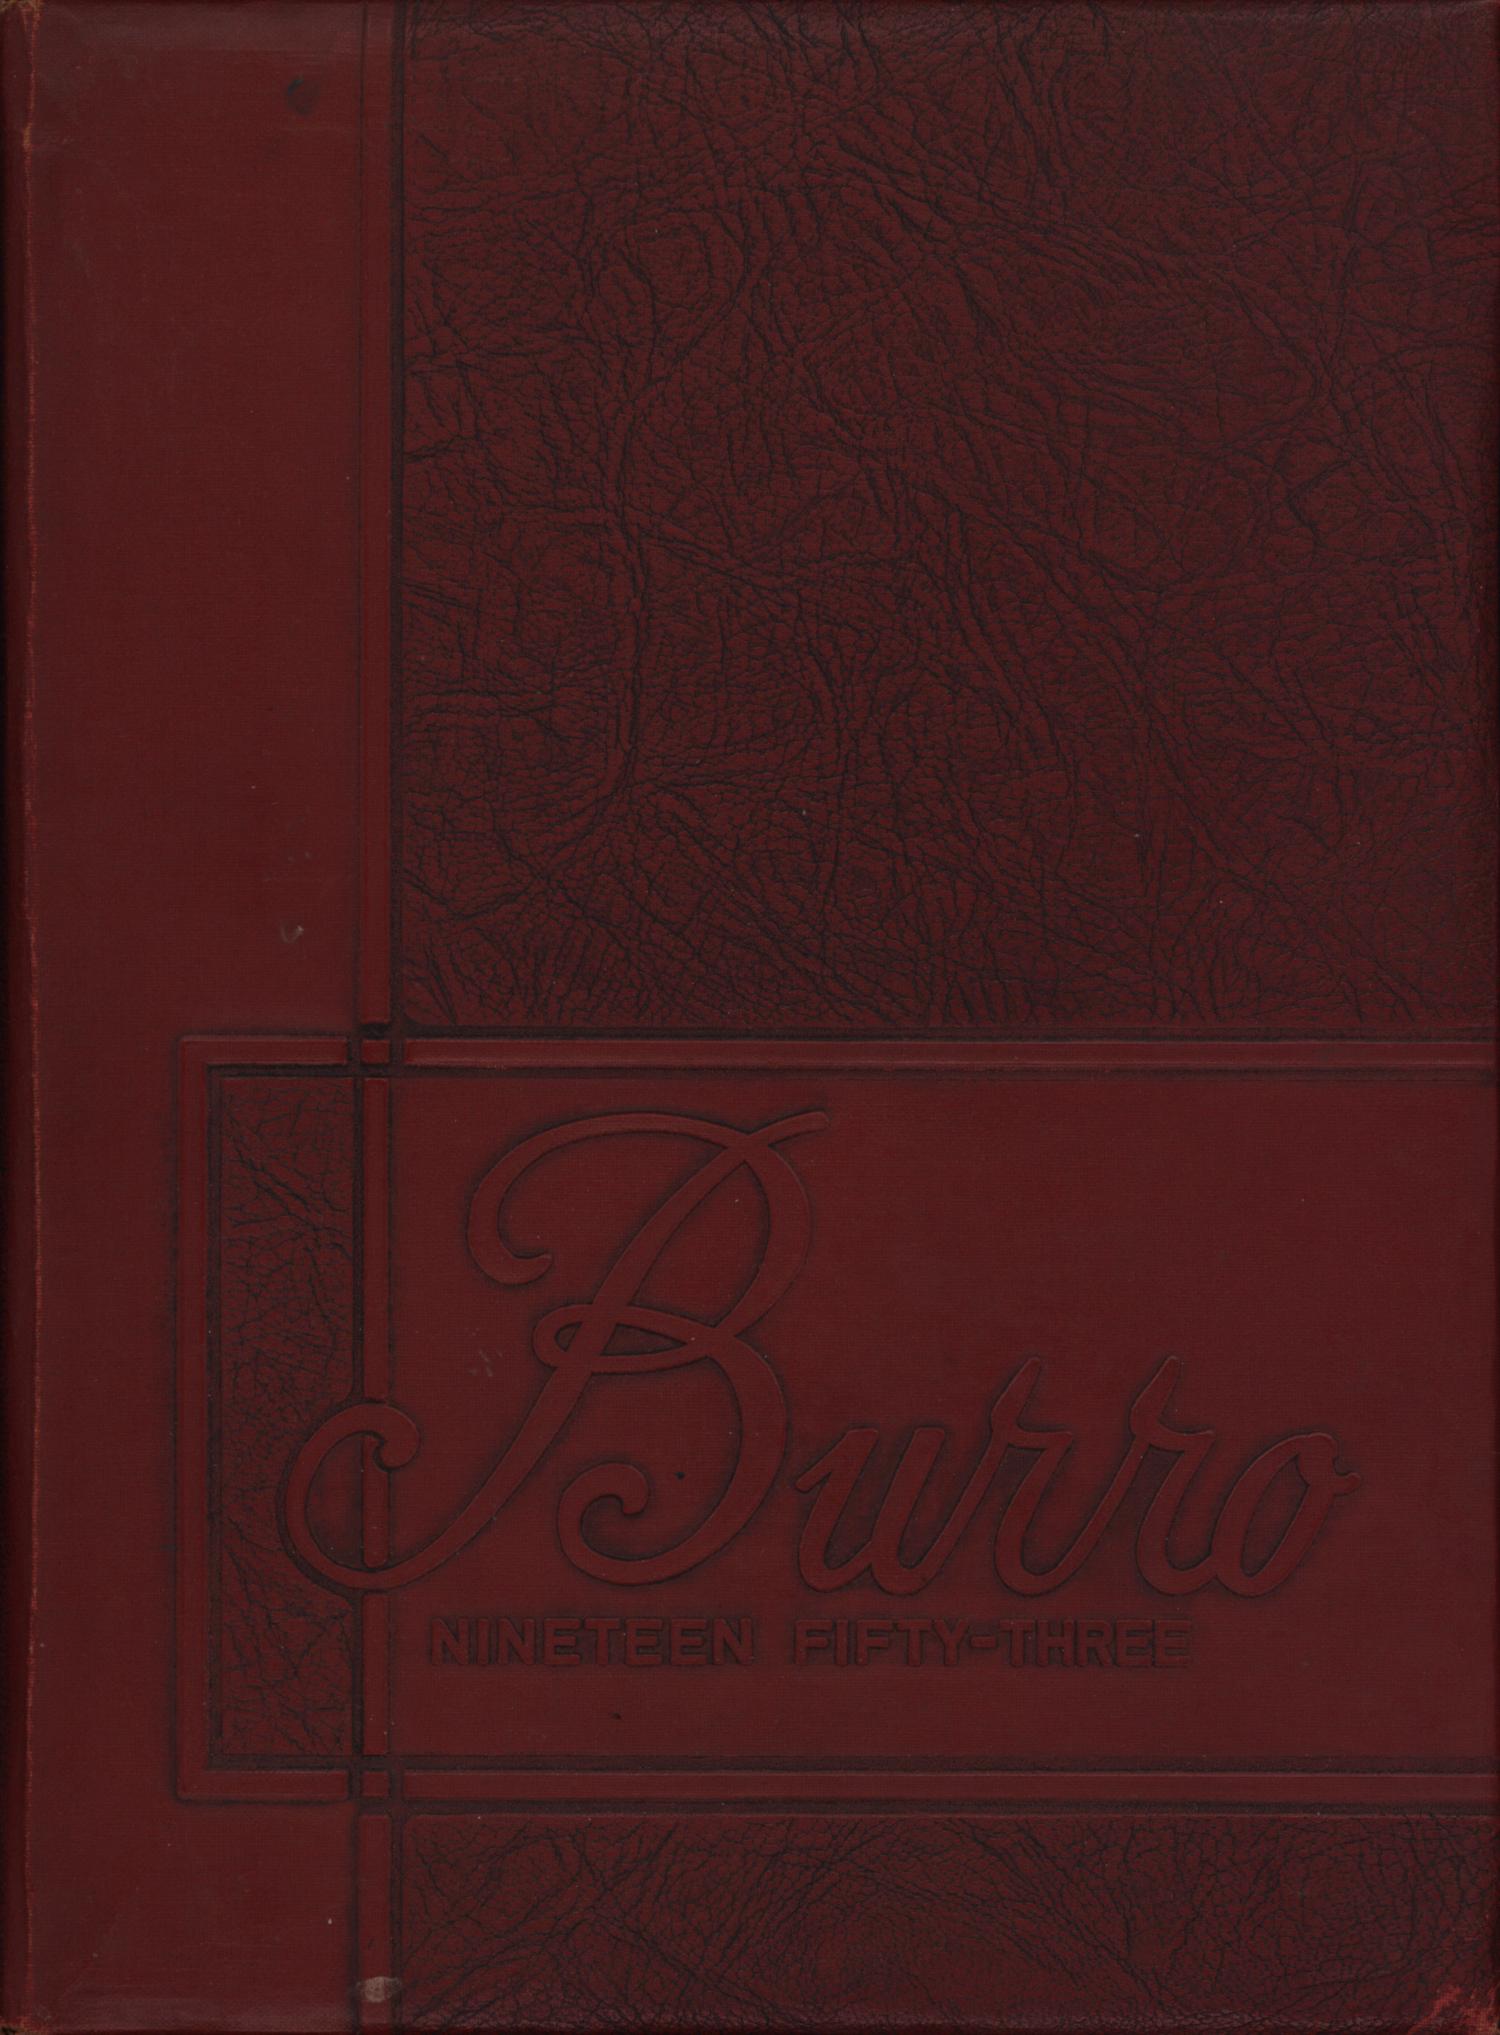 The Burro, Yearbook of Mineral Wells High School, 1953
                                                
                                                    Front Cover
                                                